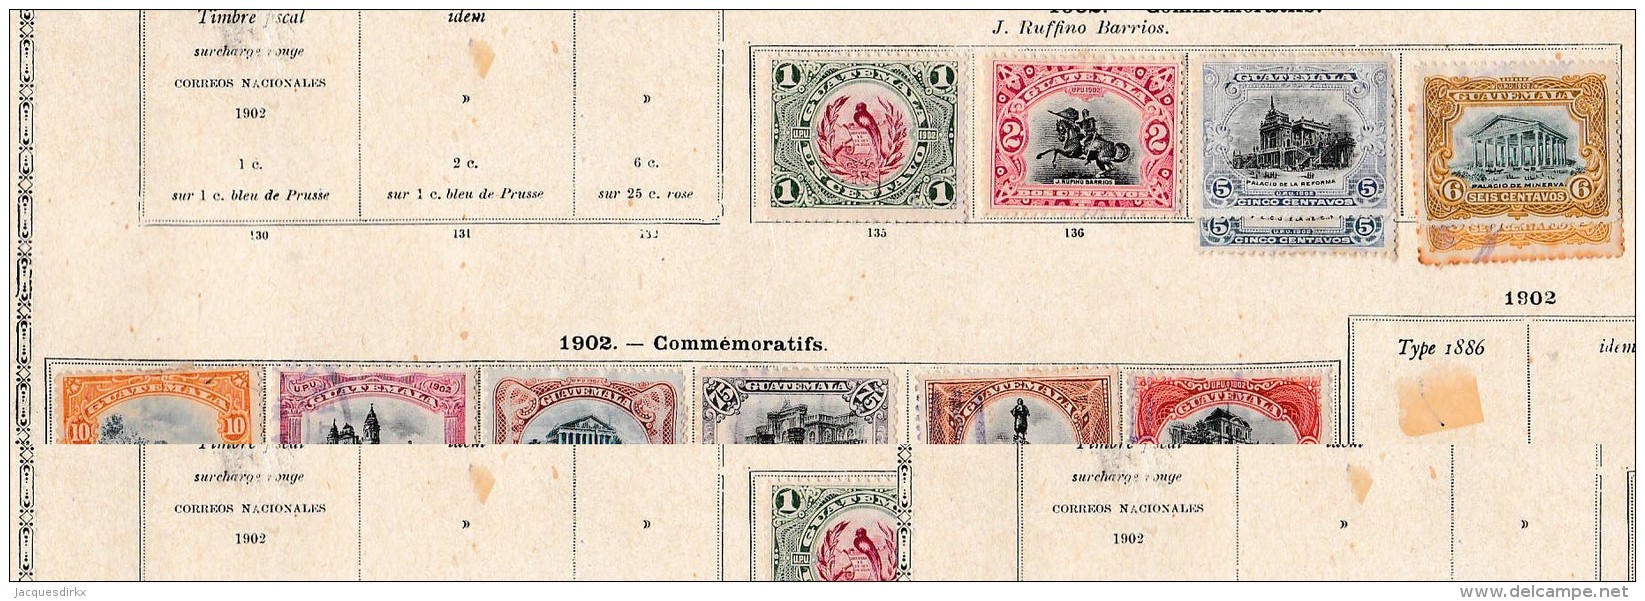 Guetemala    .            Pagina Met Zegels       .          /           .    Page With Stamps - Guatemala